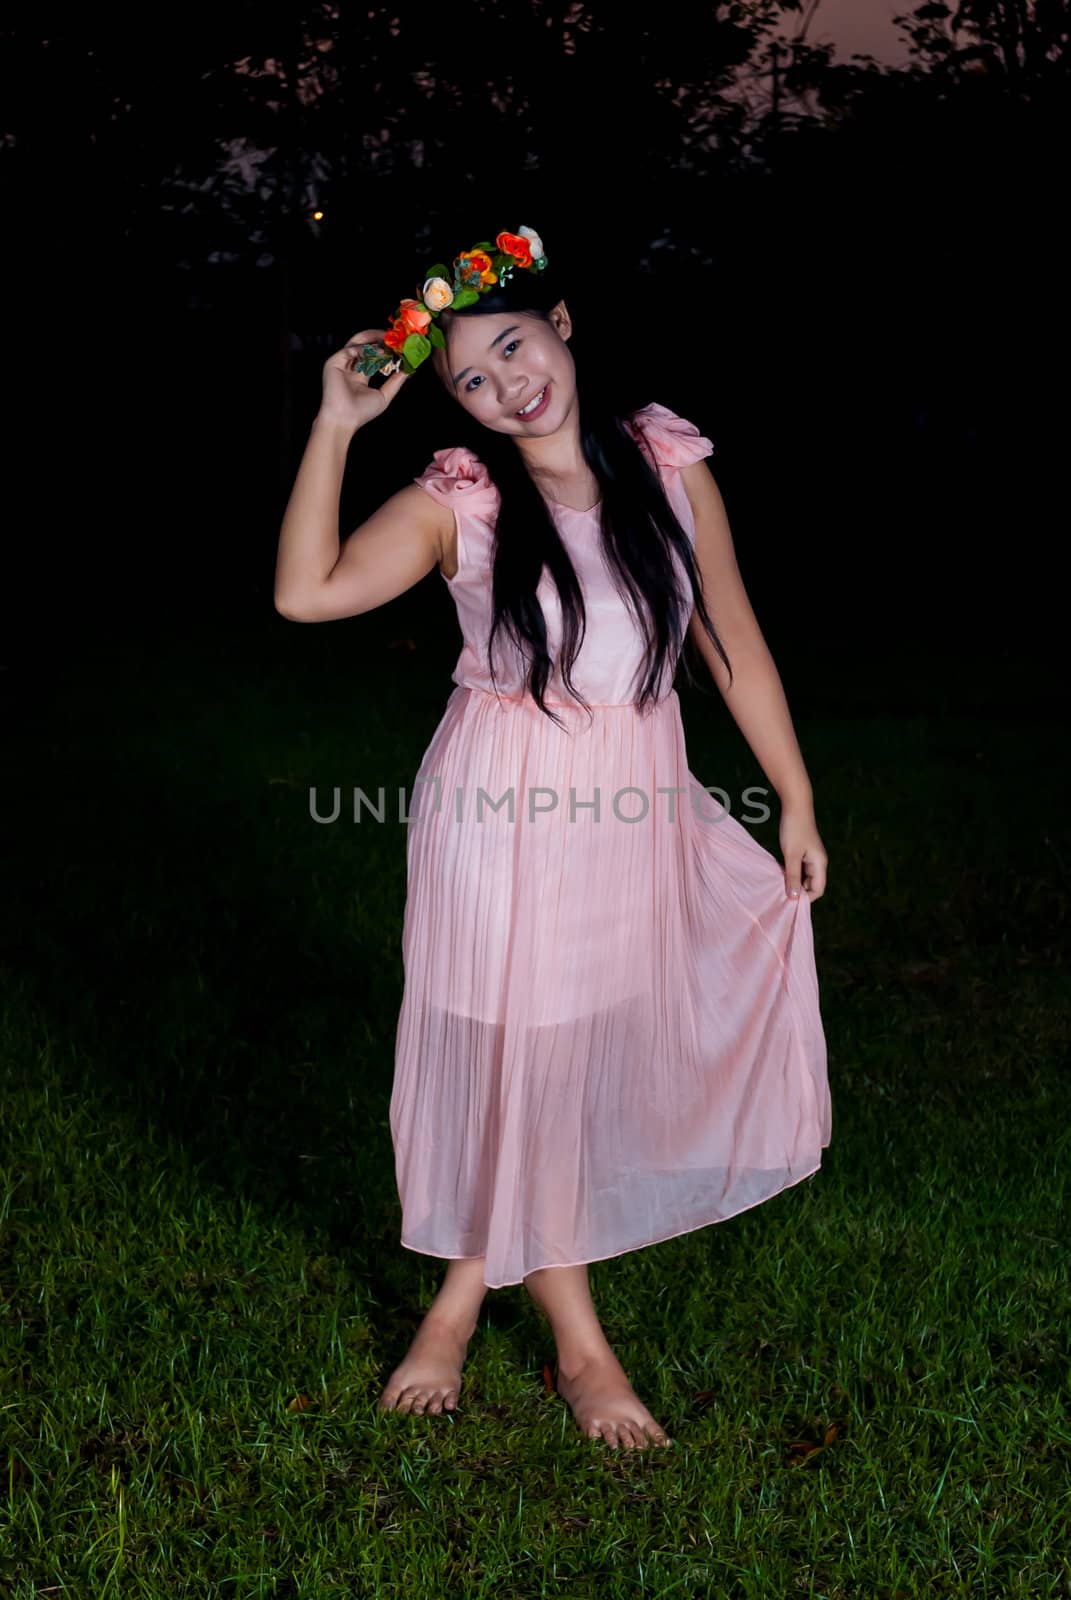 Asian Thai girl is holding flower crown in the park